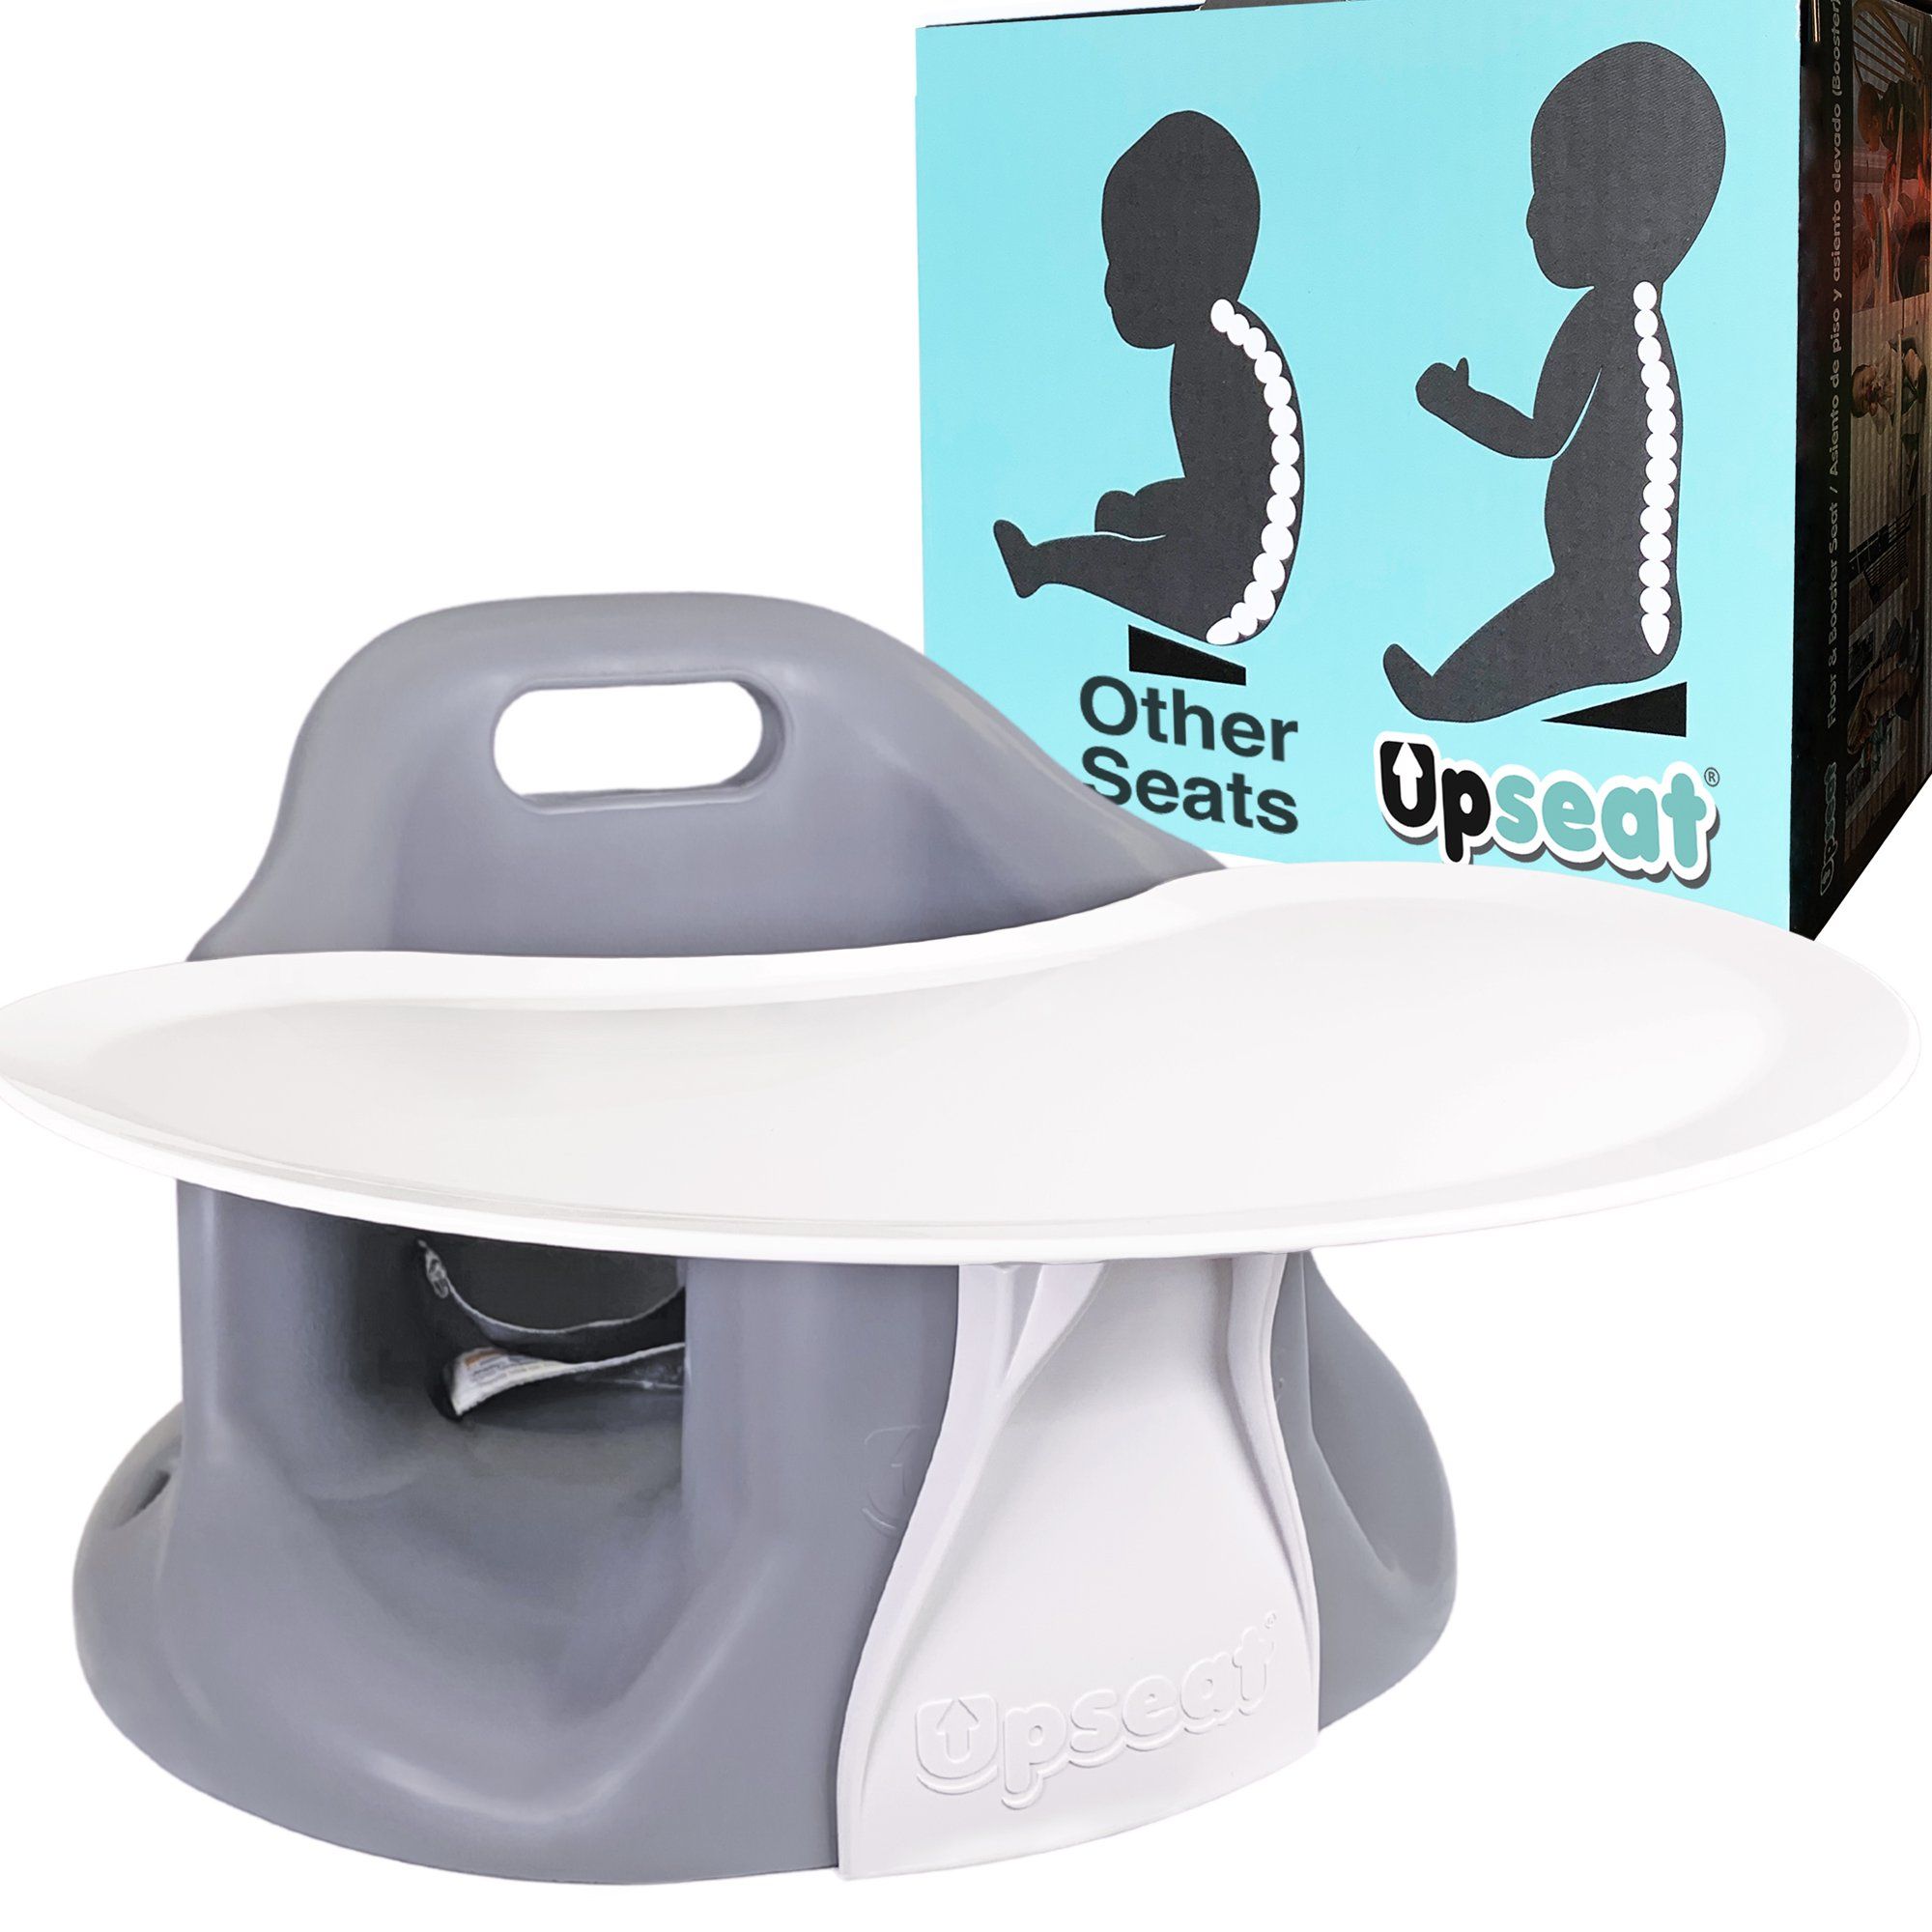 upseat baby chair booster seat with tray for upright posture and healthy hips | Walmart (US)